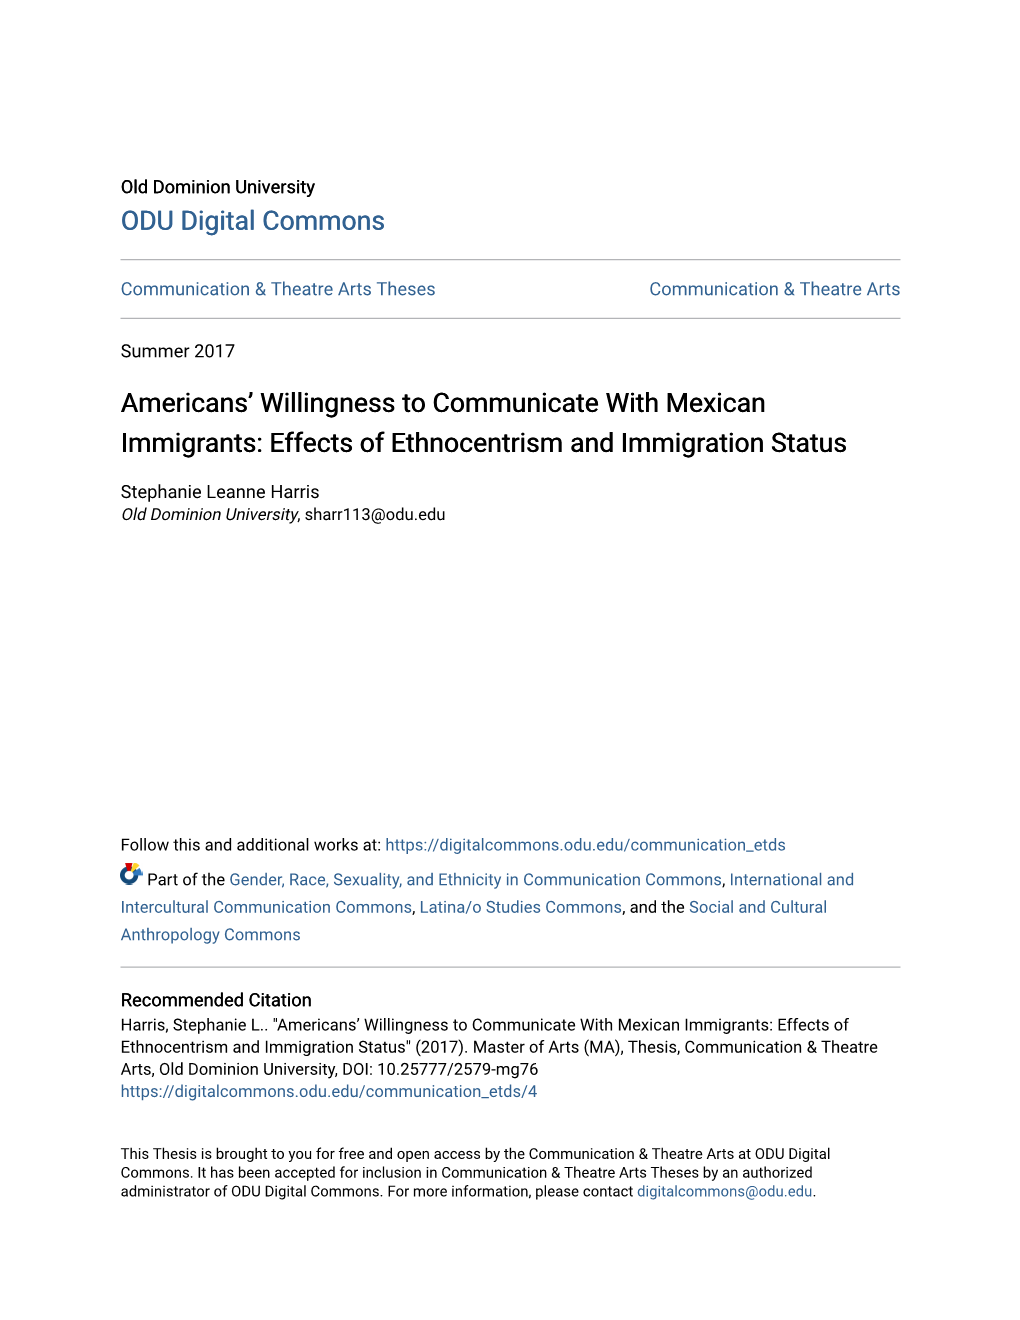 Americans' Willingness to Communicate with Mexican Immigrants: Effects of Ethnocentrism and Immigration Status